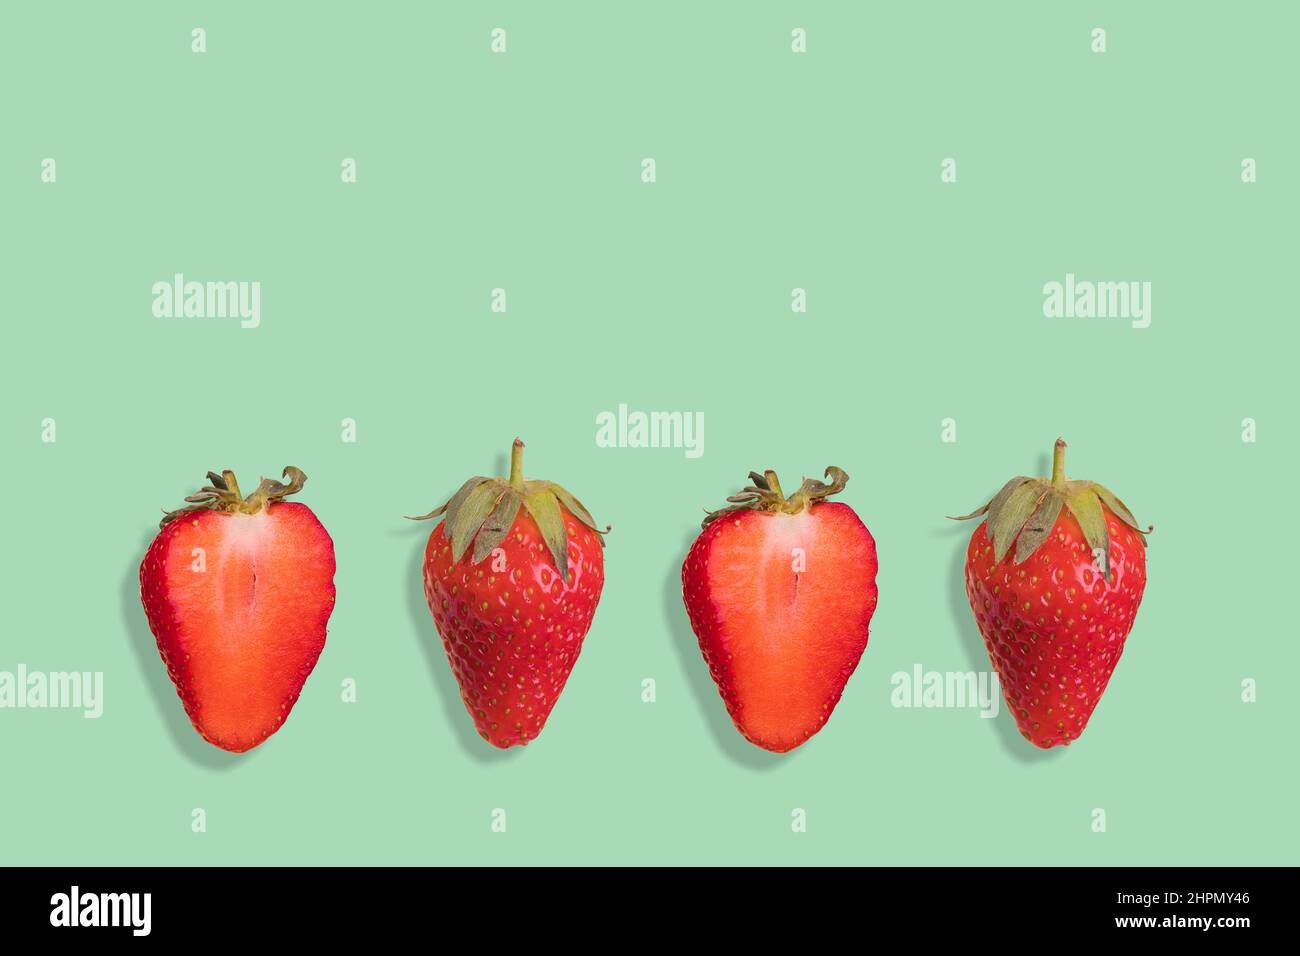 Strawberry pattern on a pastel green background, creative flat lay healthy food concept, top view. Stock Photo